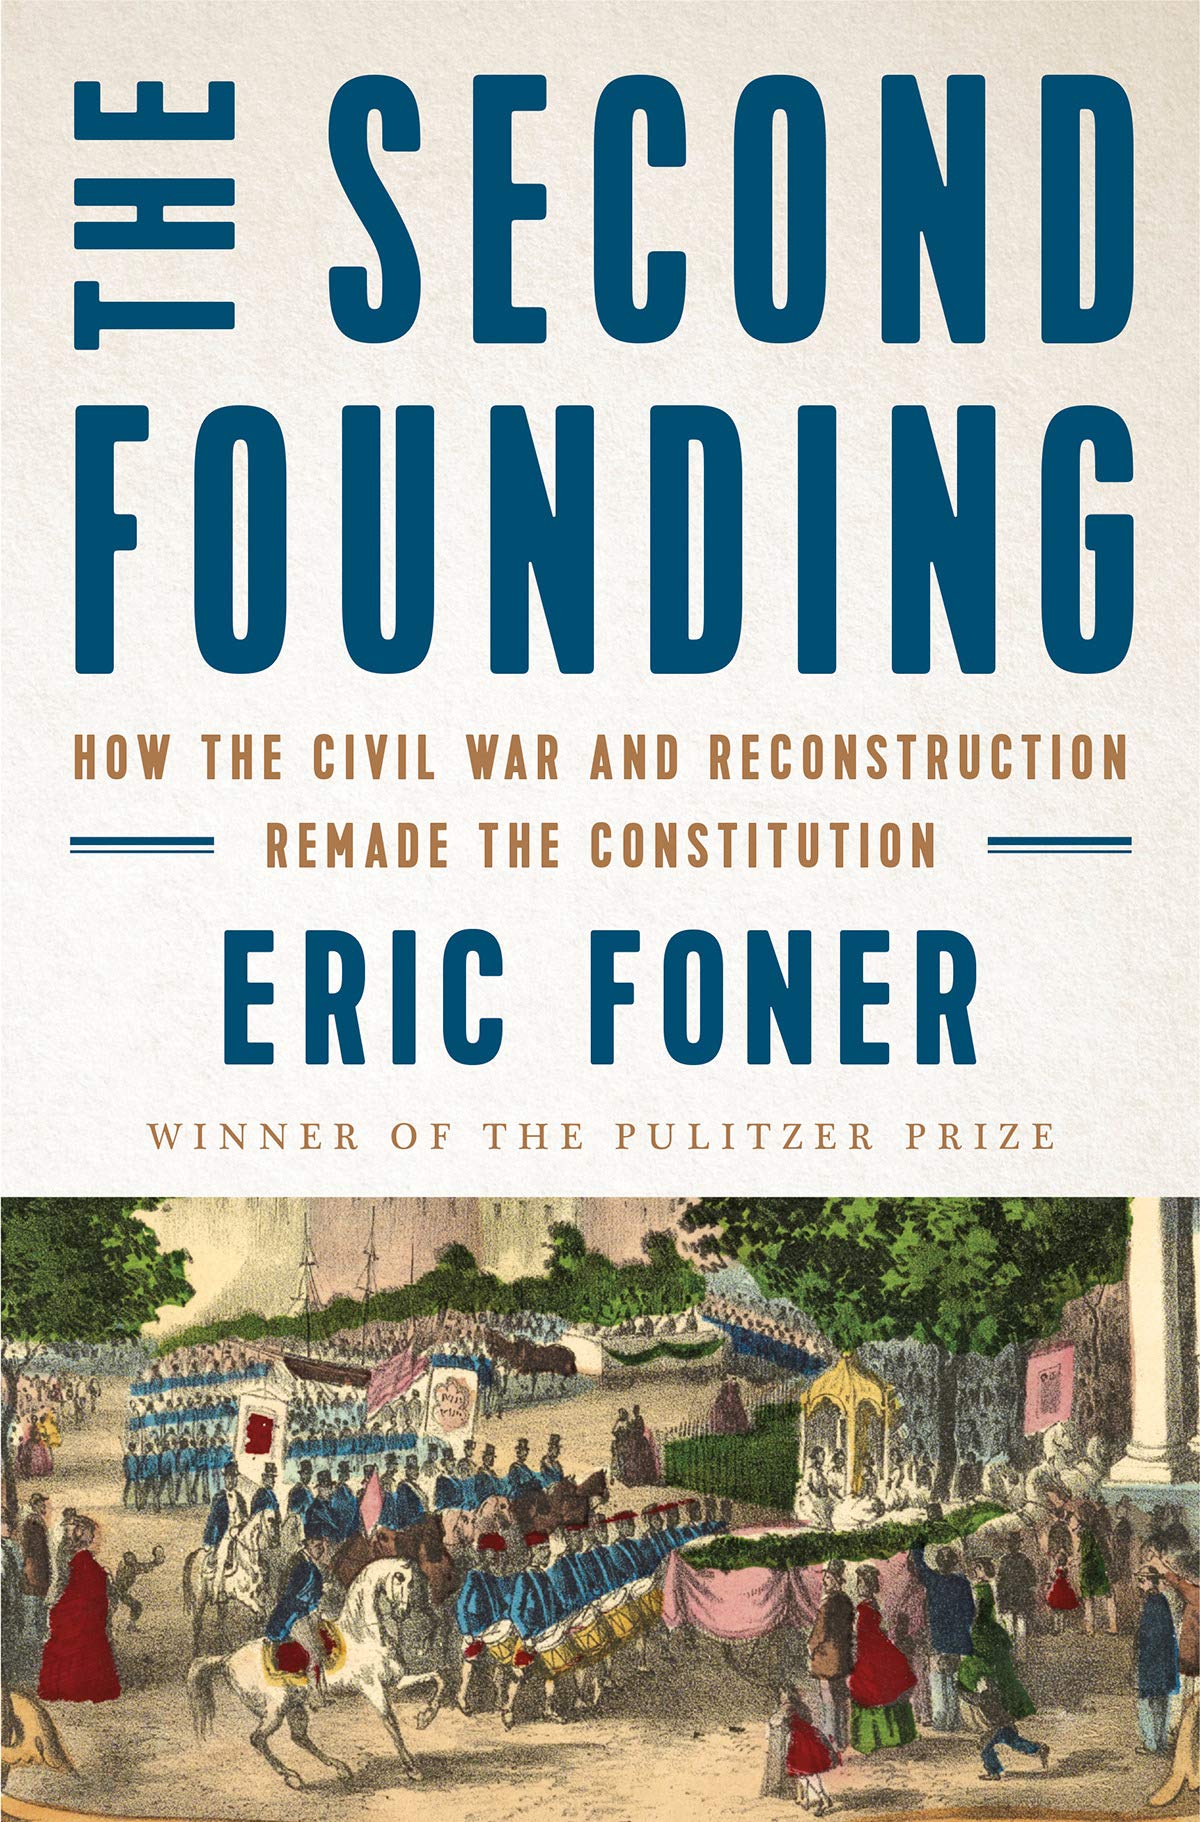 The Second Founding: How the Civil War and Reconstruction Remade the Constitution